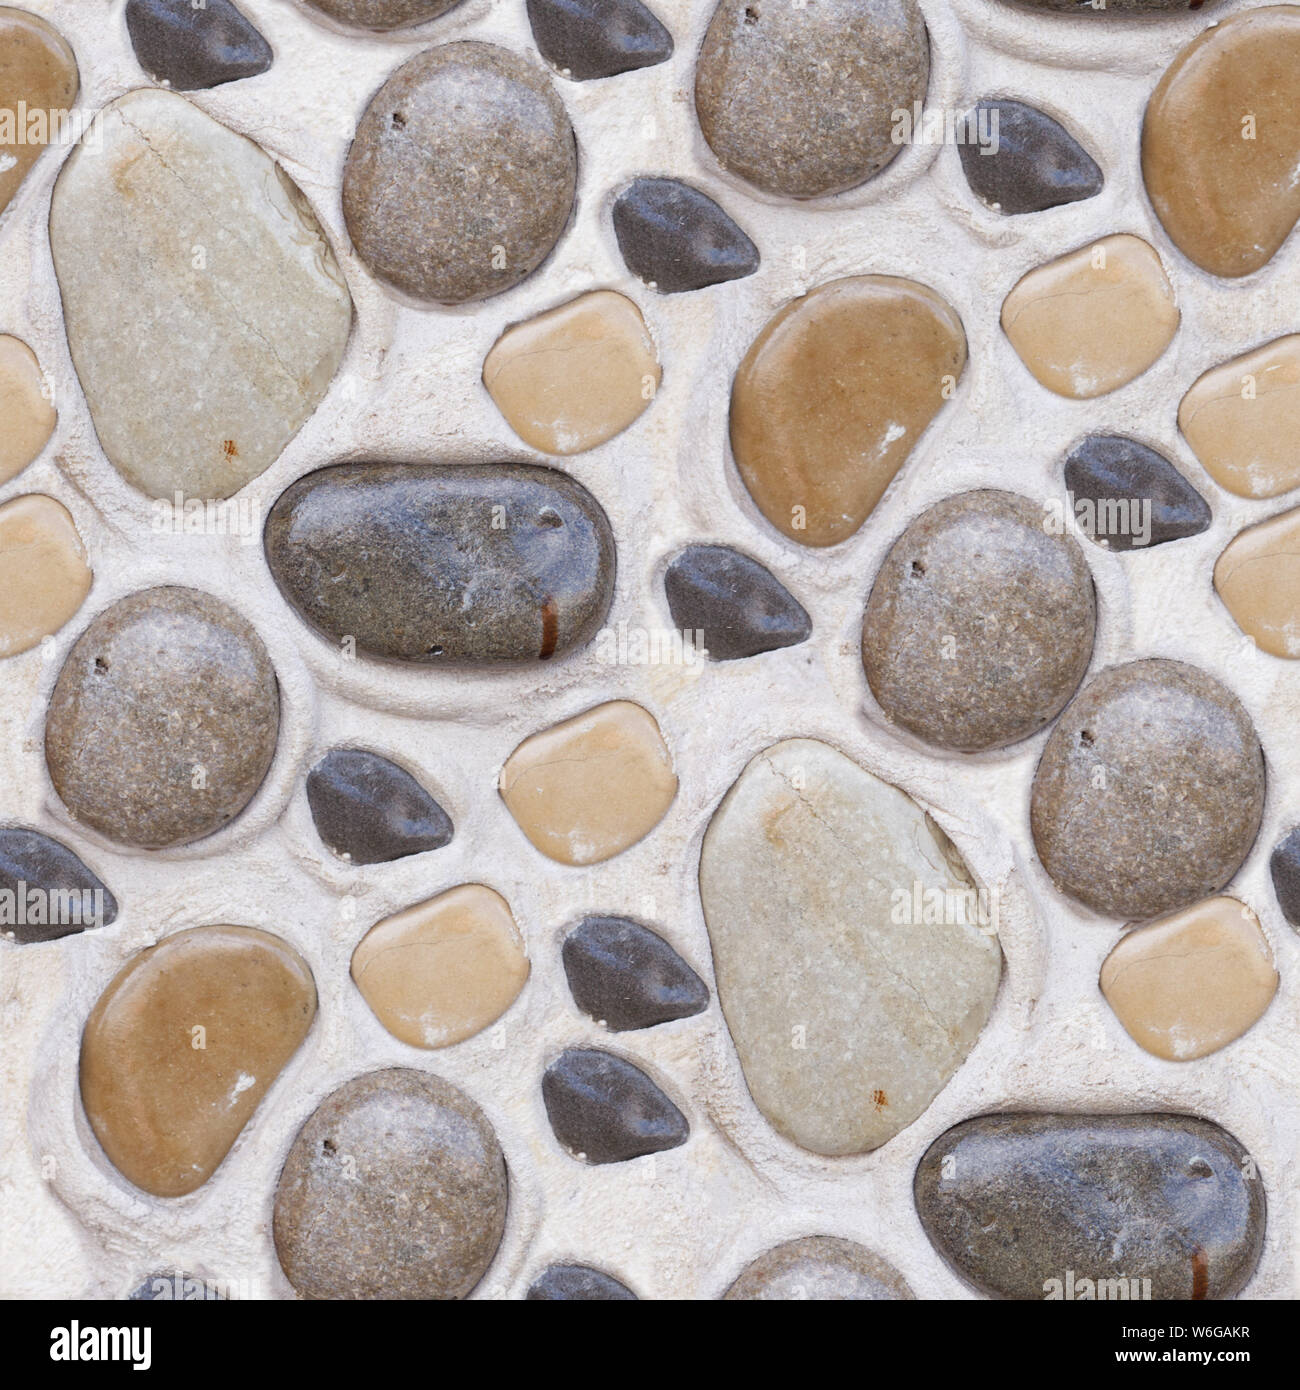 Abstract seamless photo texture of bright rocks in dry cement. Rocks has wet surface. Stock Photo